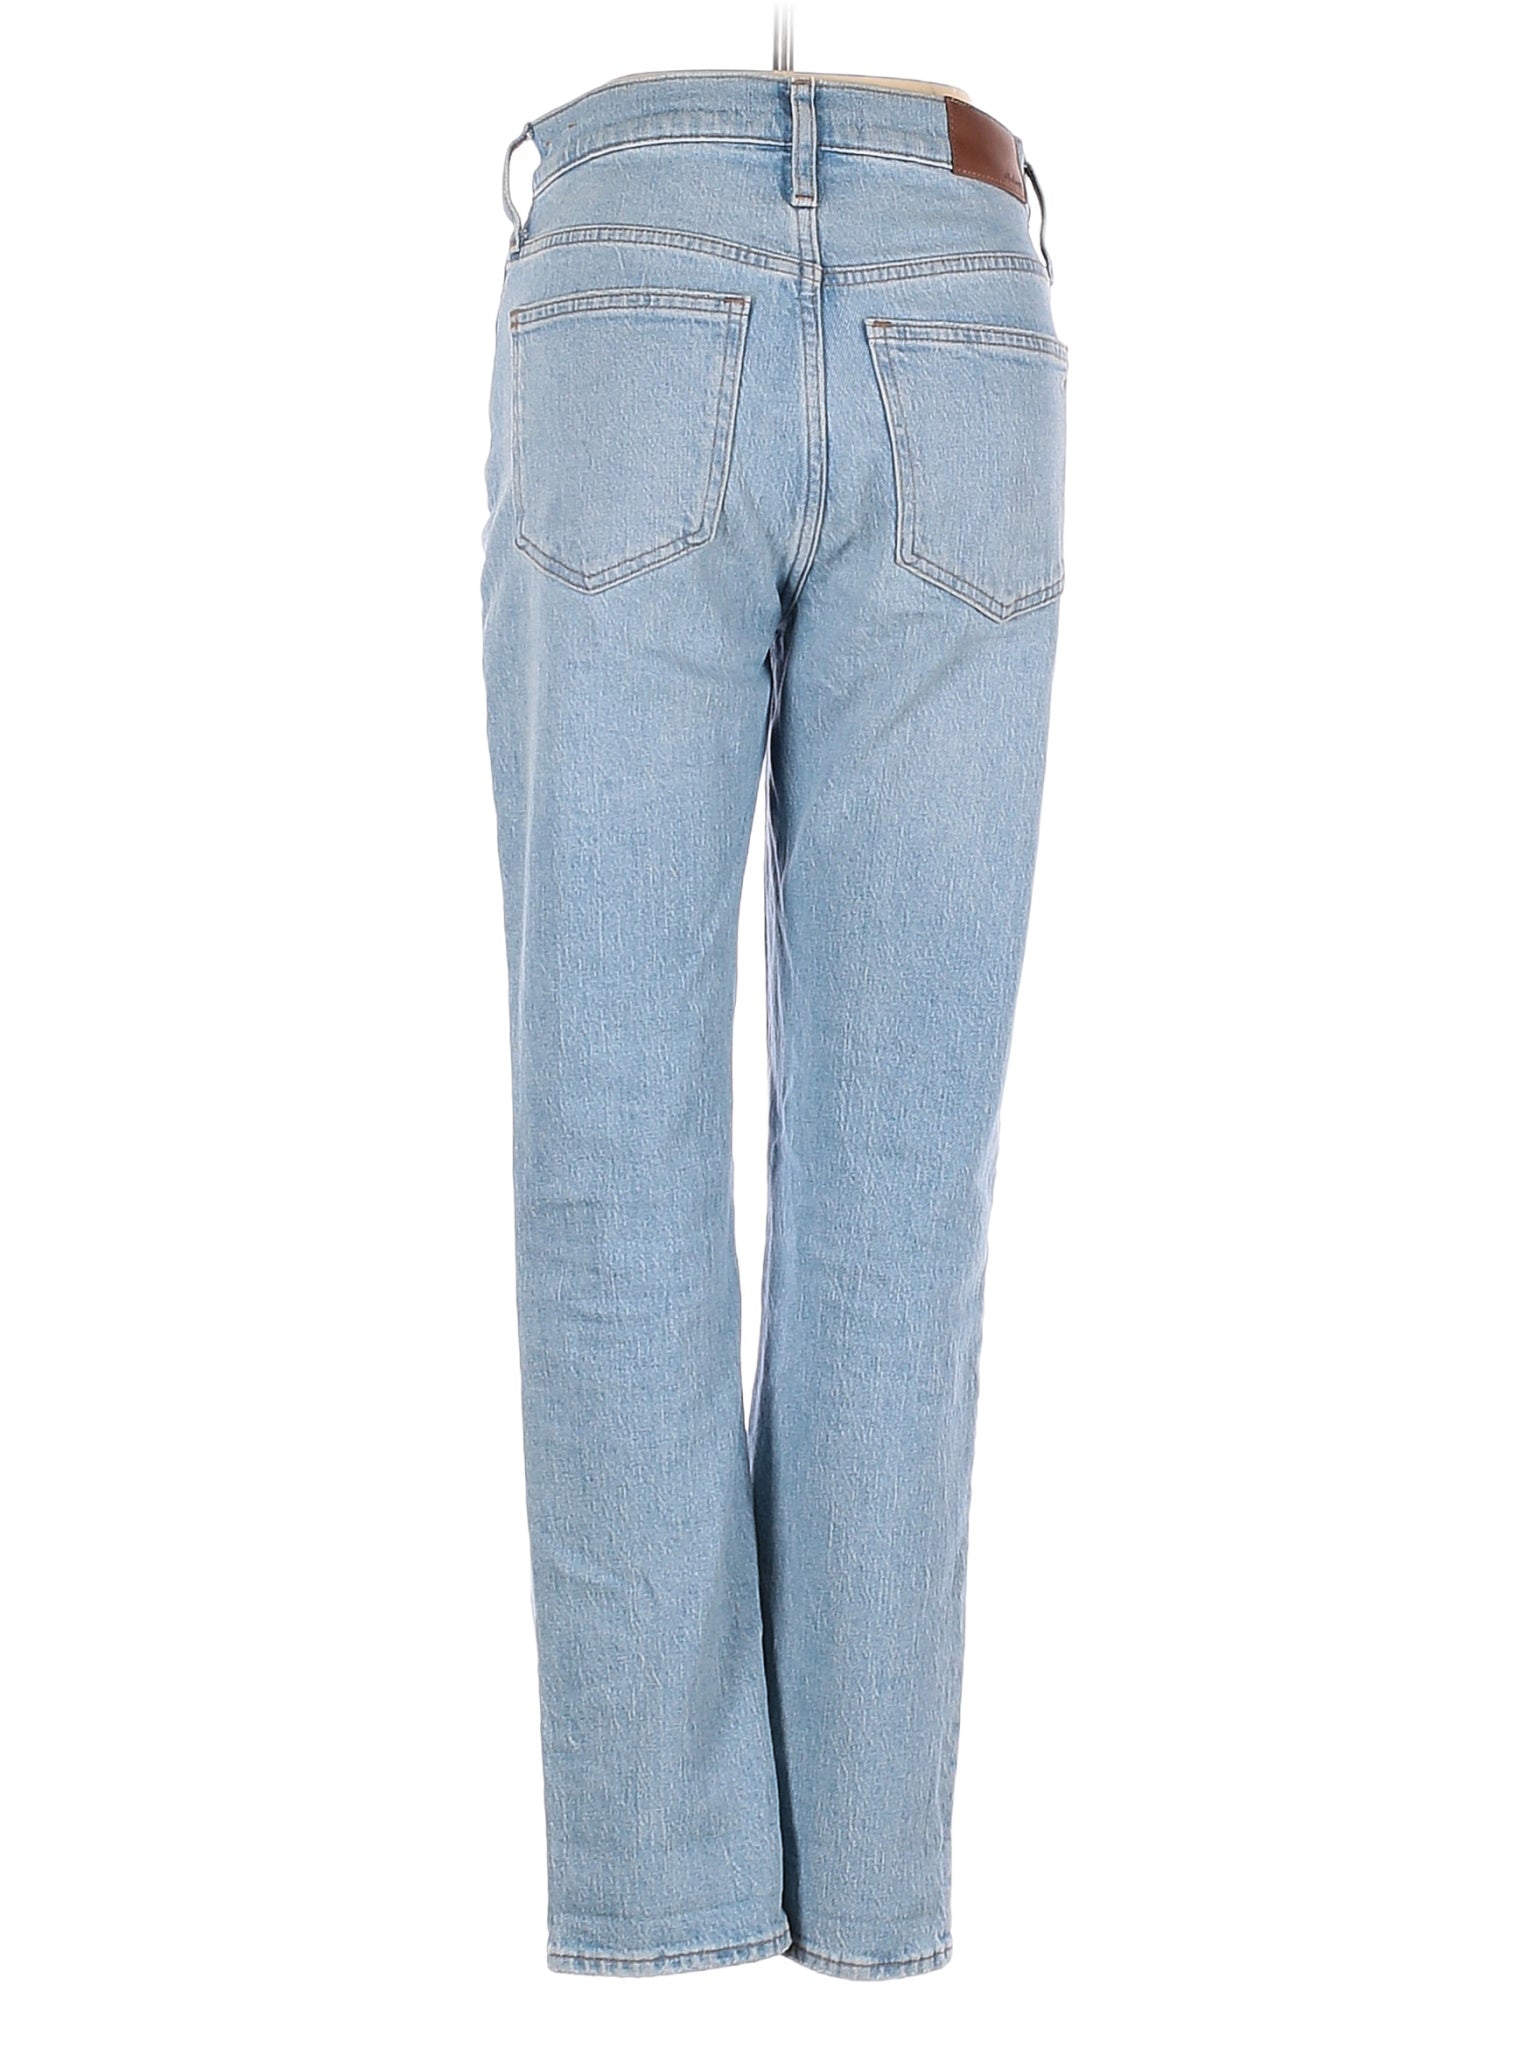 High-Rise Boyjeans Jeans in Light Wash waist size - 25